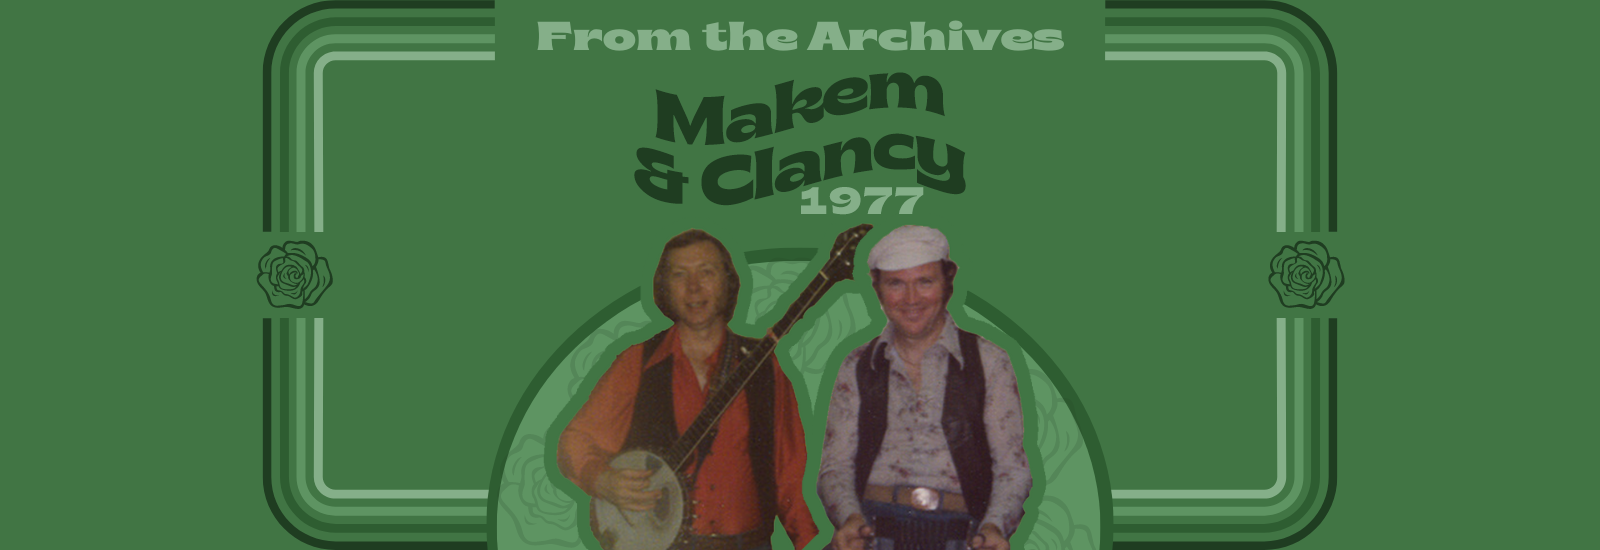 Makem and Clancy 1977 #103